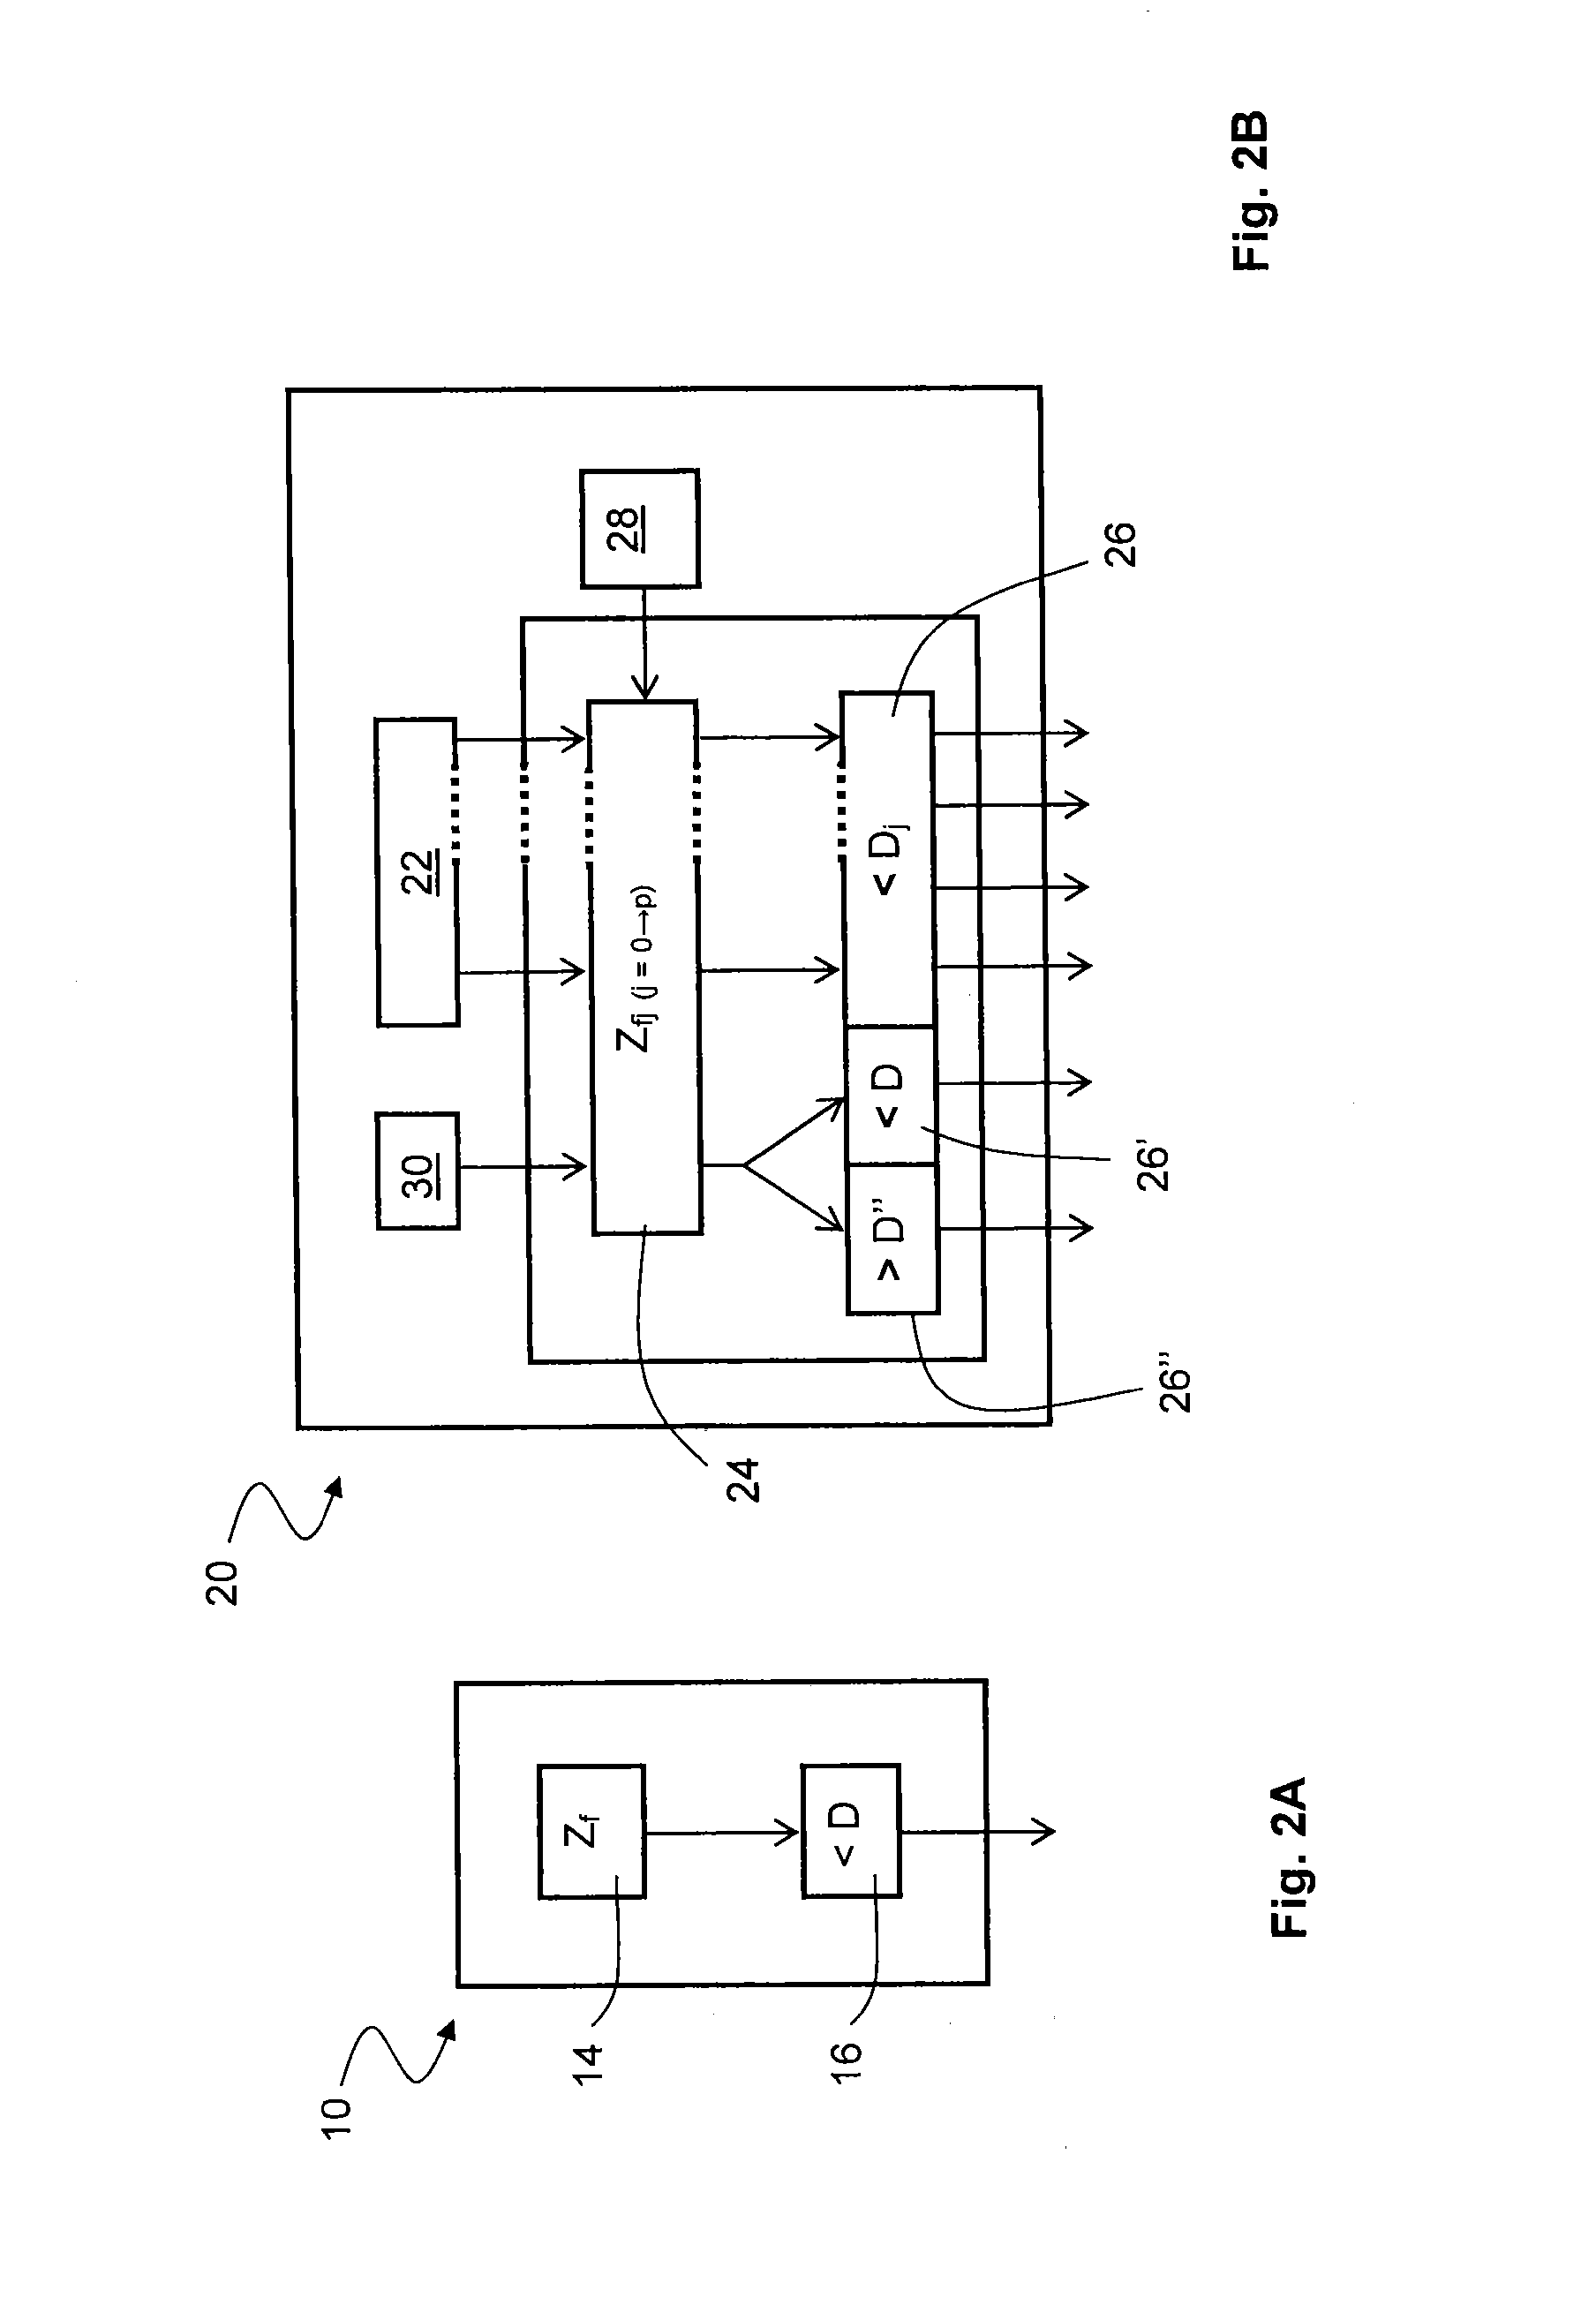 Insulation monitoring system for secured electric power system